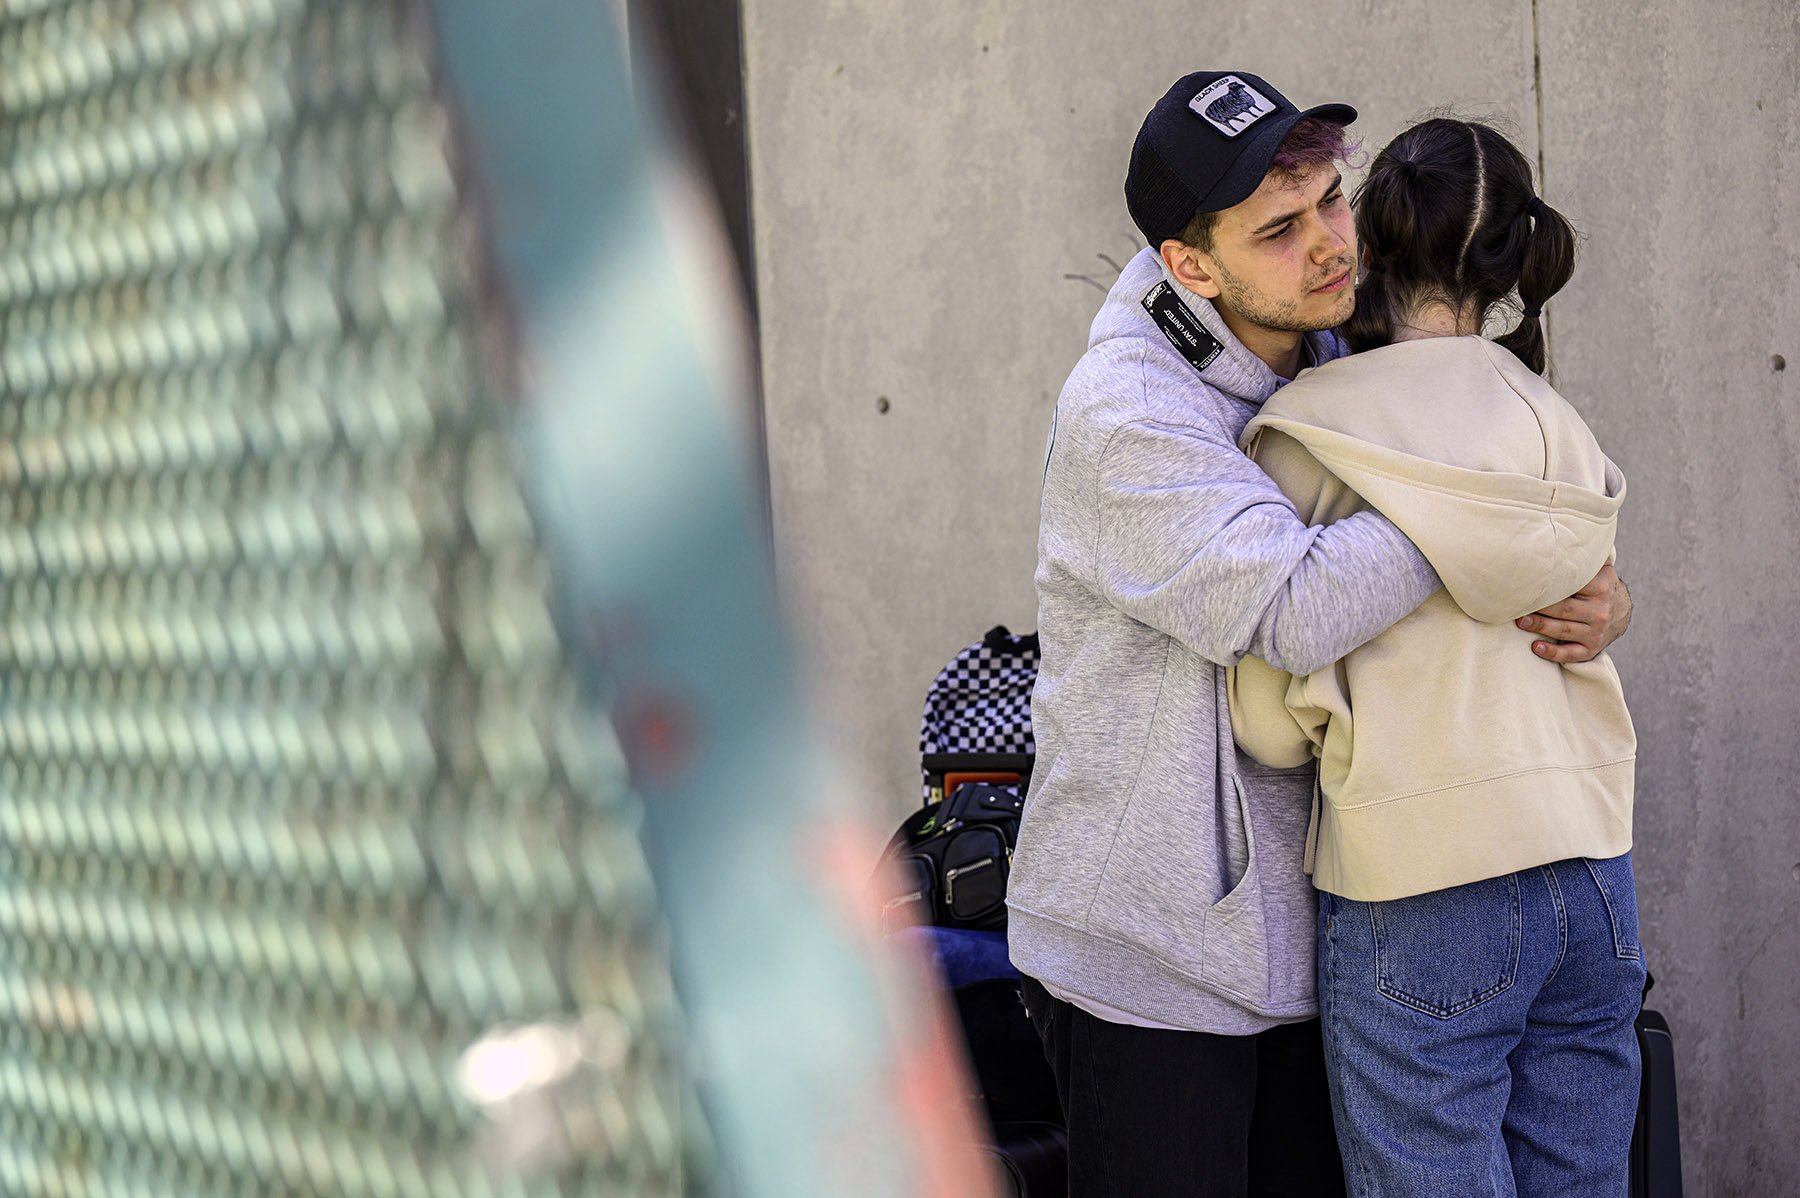  Anton Shchuz, 22, comforts his wife, Polina Shchuz, 20, at the Tijuana border on Wednesday, March 30, 2022. Polina, who is Russian, fears she will not be allowed into the U.S. with her Ukrainian husband. After Russia invaded Ukraine, the U.S. agreed